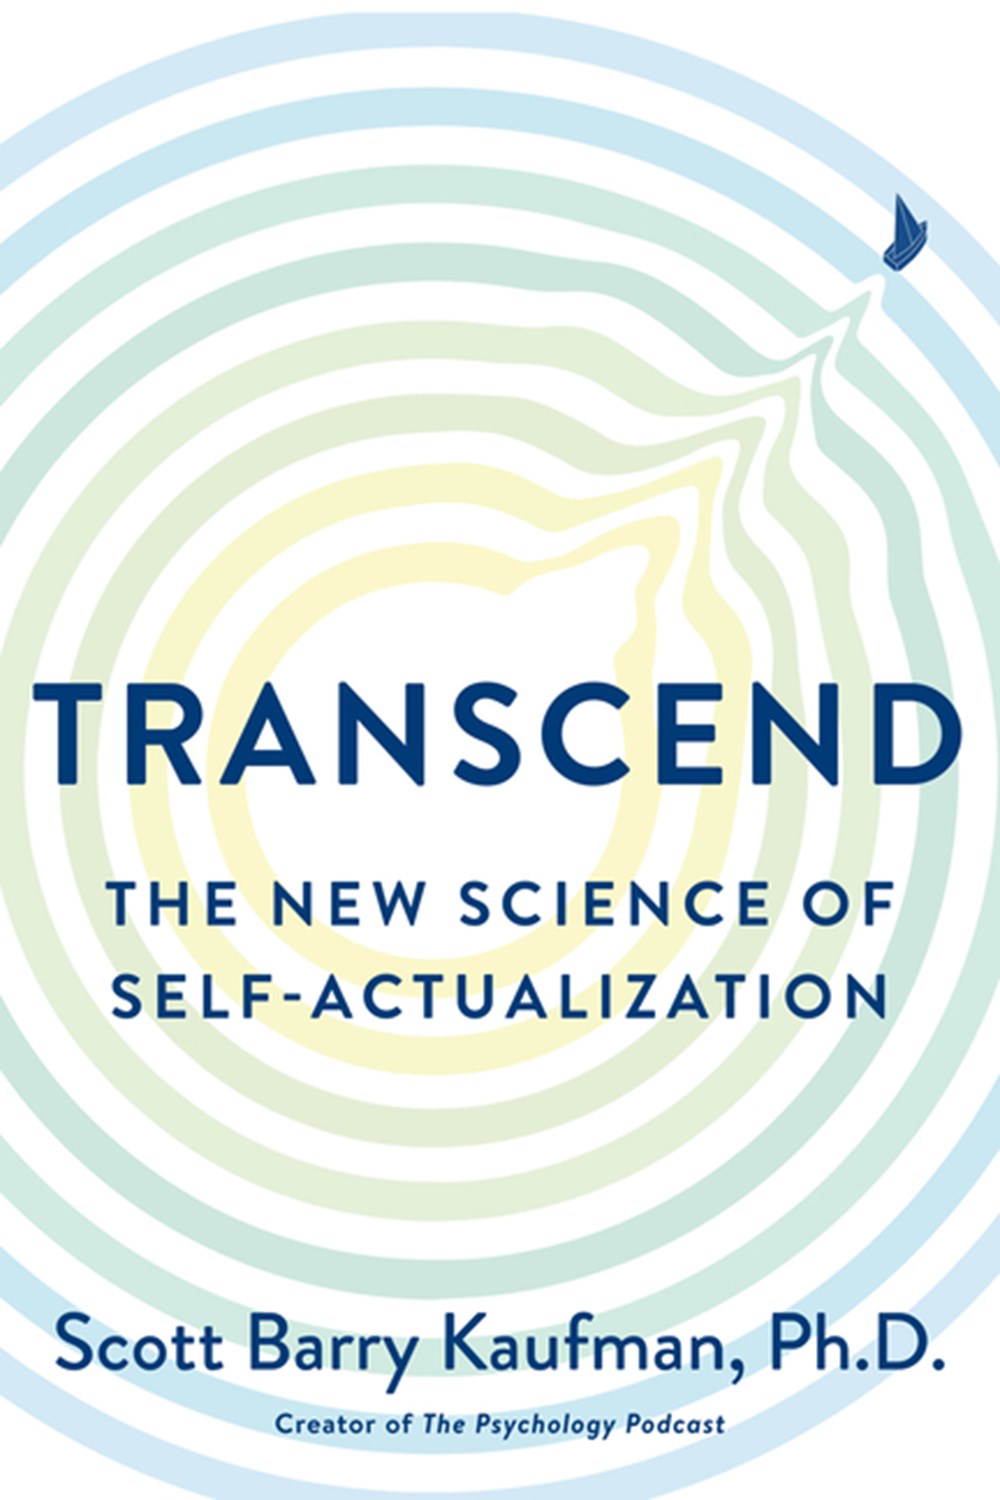 Transcend The New Science of Self-Actualization